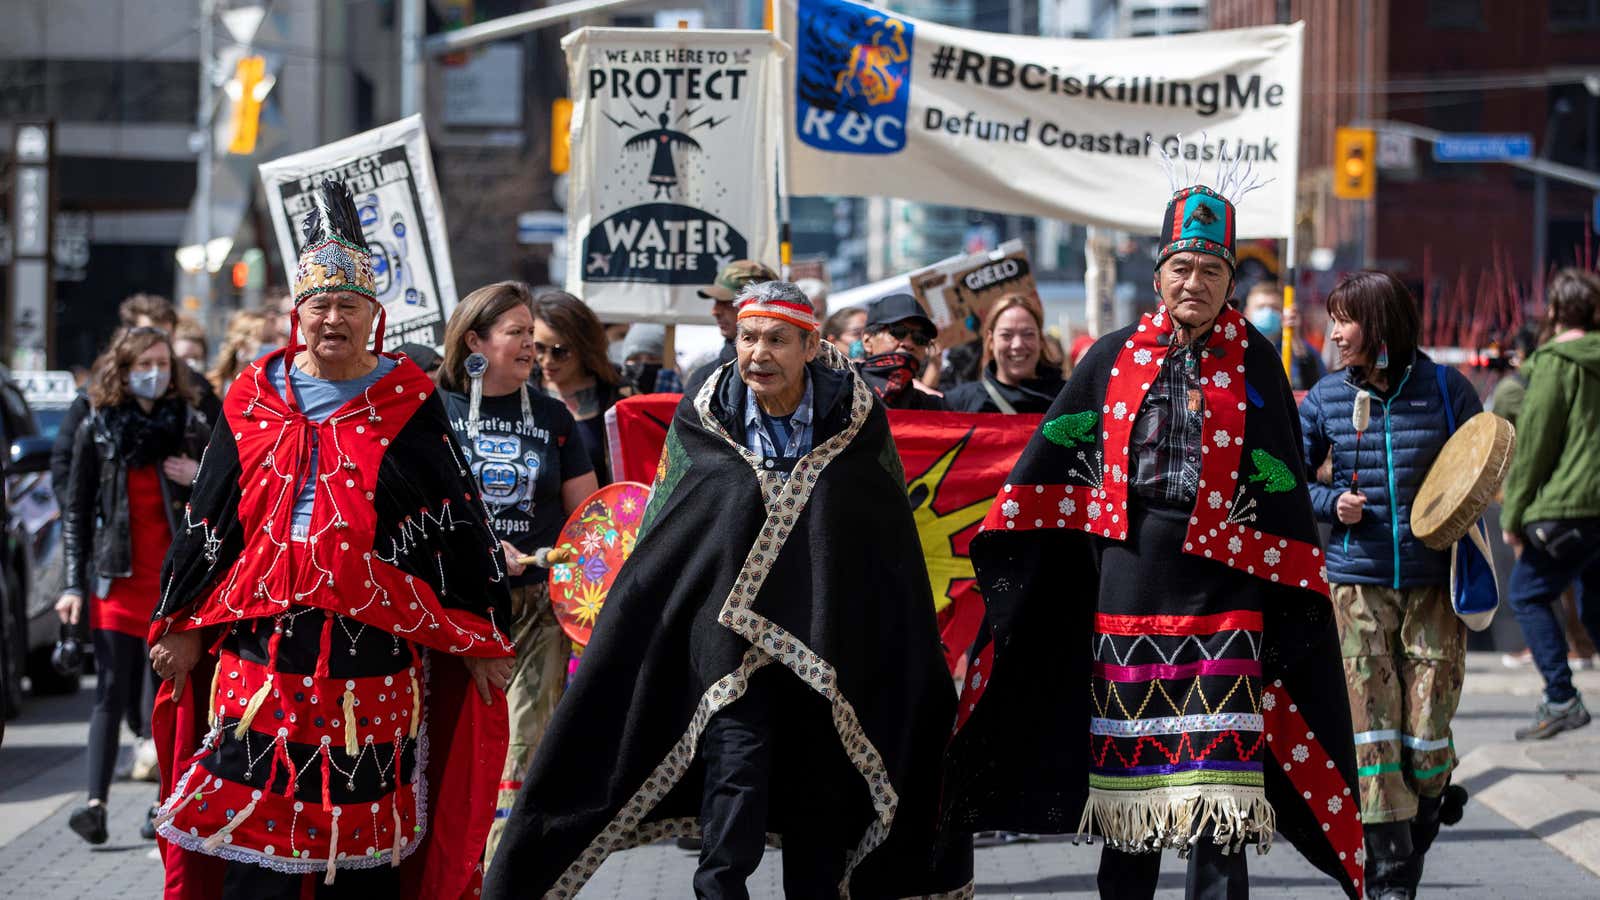 Wet’suwet’en hereditary chiefs led a protest outside the headquarters of the Royal Bank in Canada on April 7, over its financing of a gas pipeline.